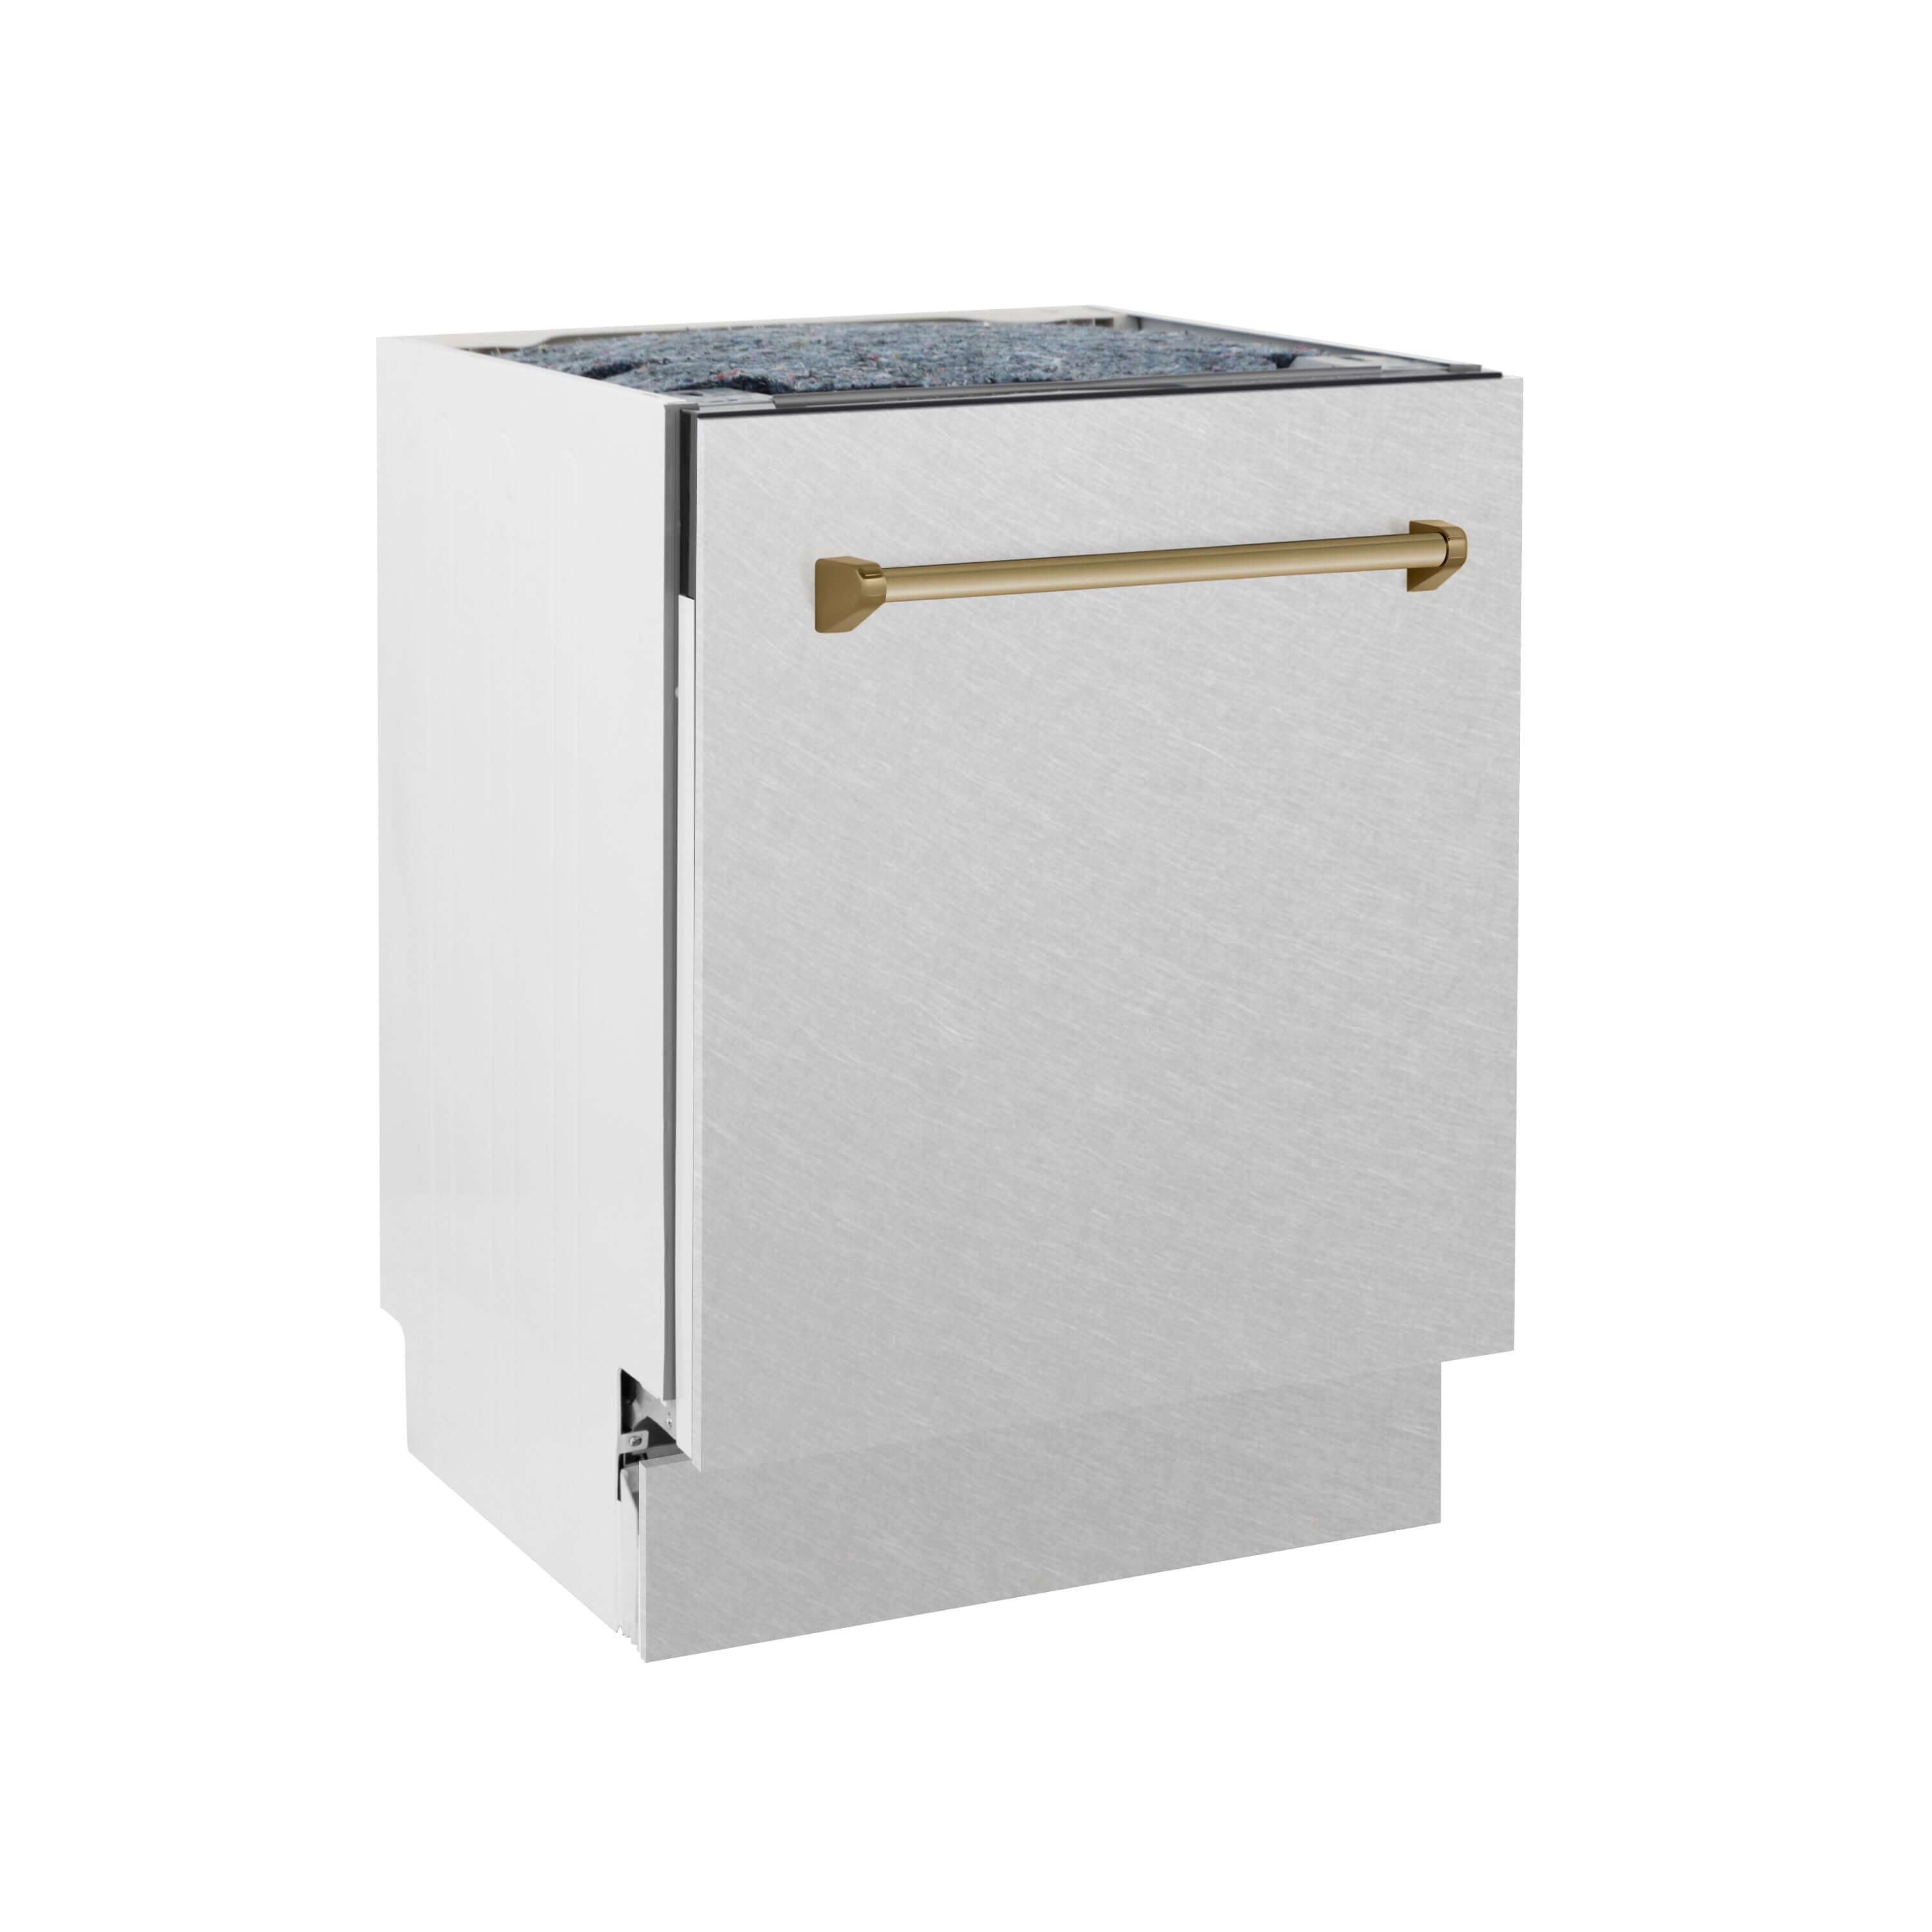 ZLINE Autograph Edition 24 in. Tallac Series 3rd Rack Top Control Built-In Tall Tub Dishwasher in Fingerprint Resistant Stainless Steel with Champagne Bronze Handle, 51dBa (DWVZ-SN-24-CB) front, closed.